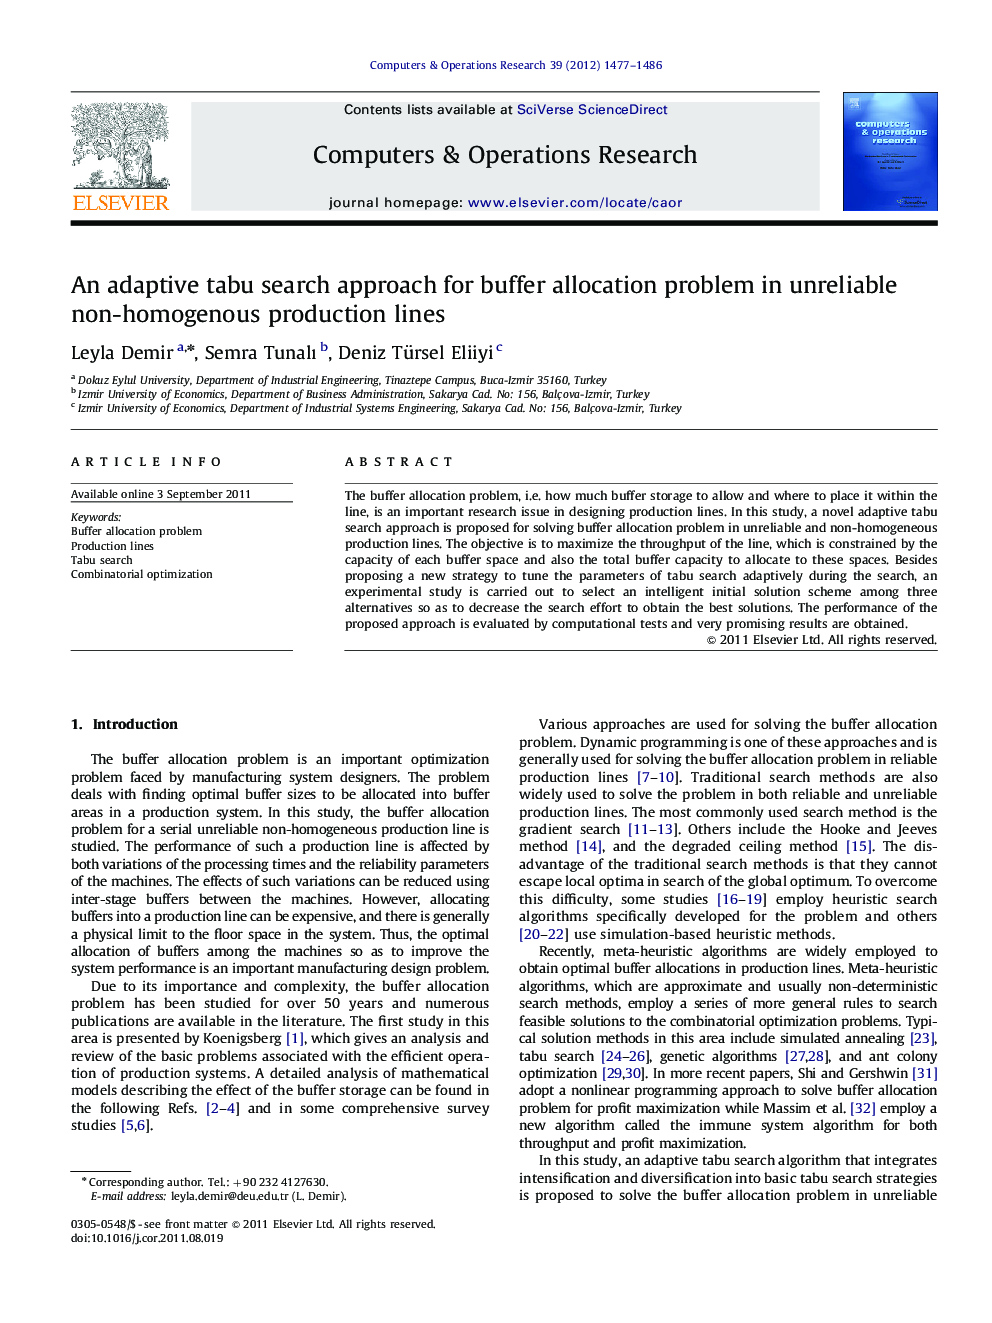 An adaptive tabu search approach for buffer allocation problem in unreliable non-homogenous production lines